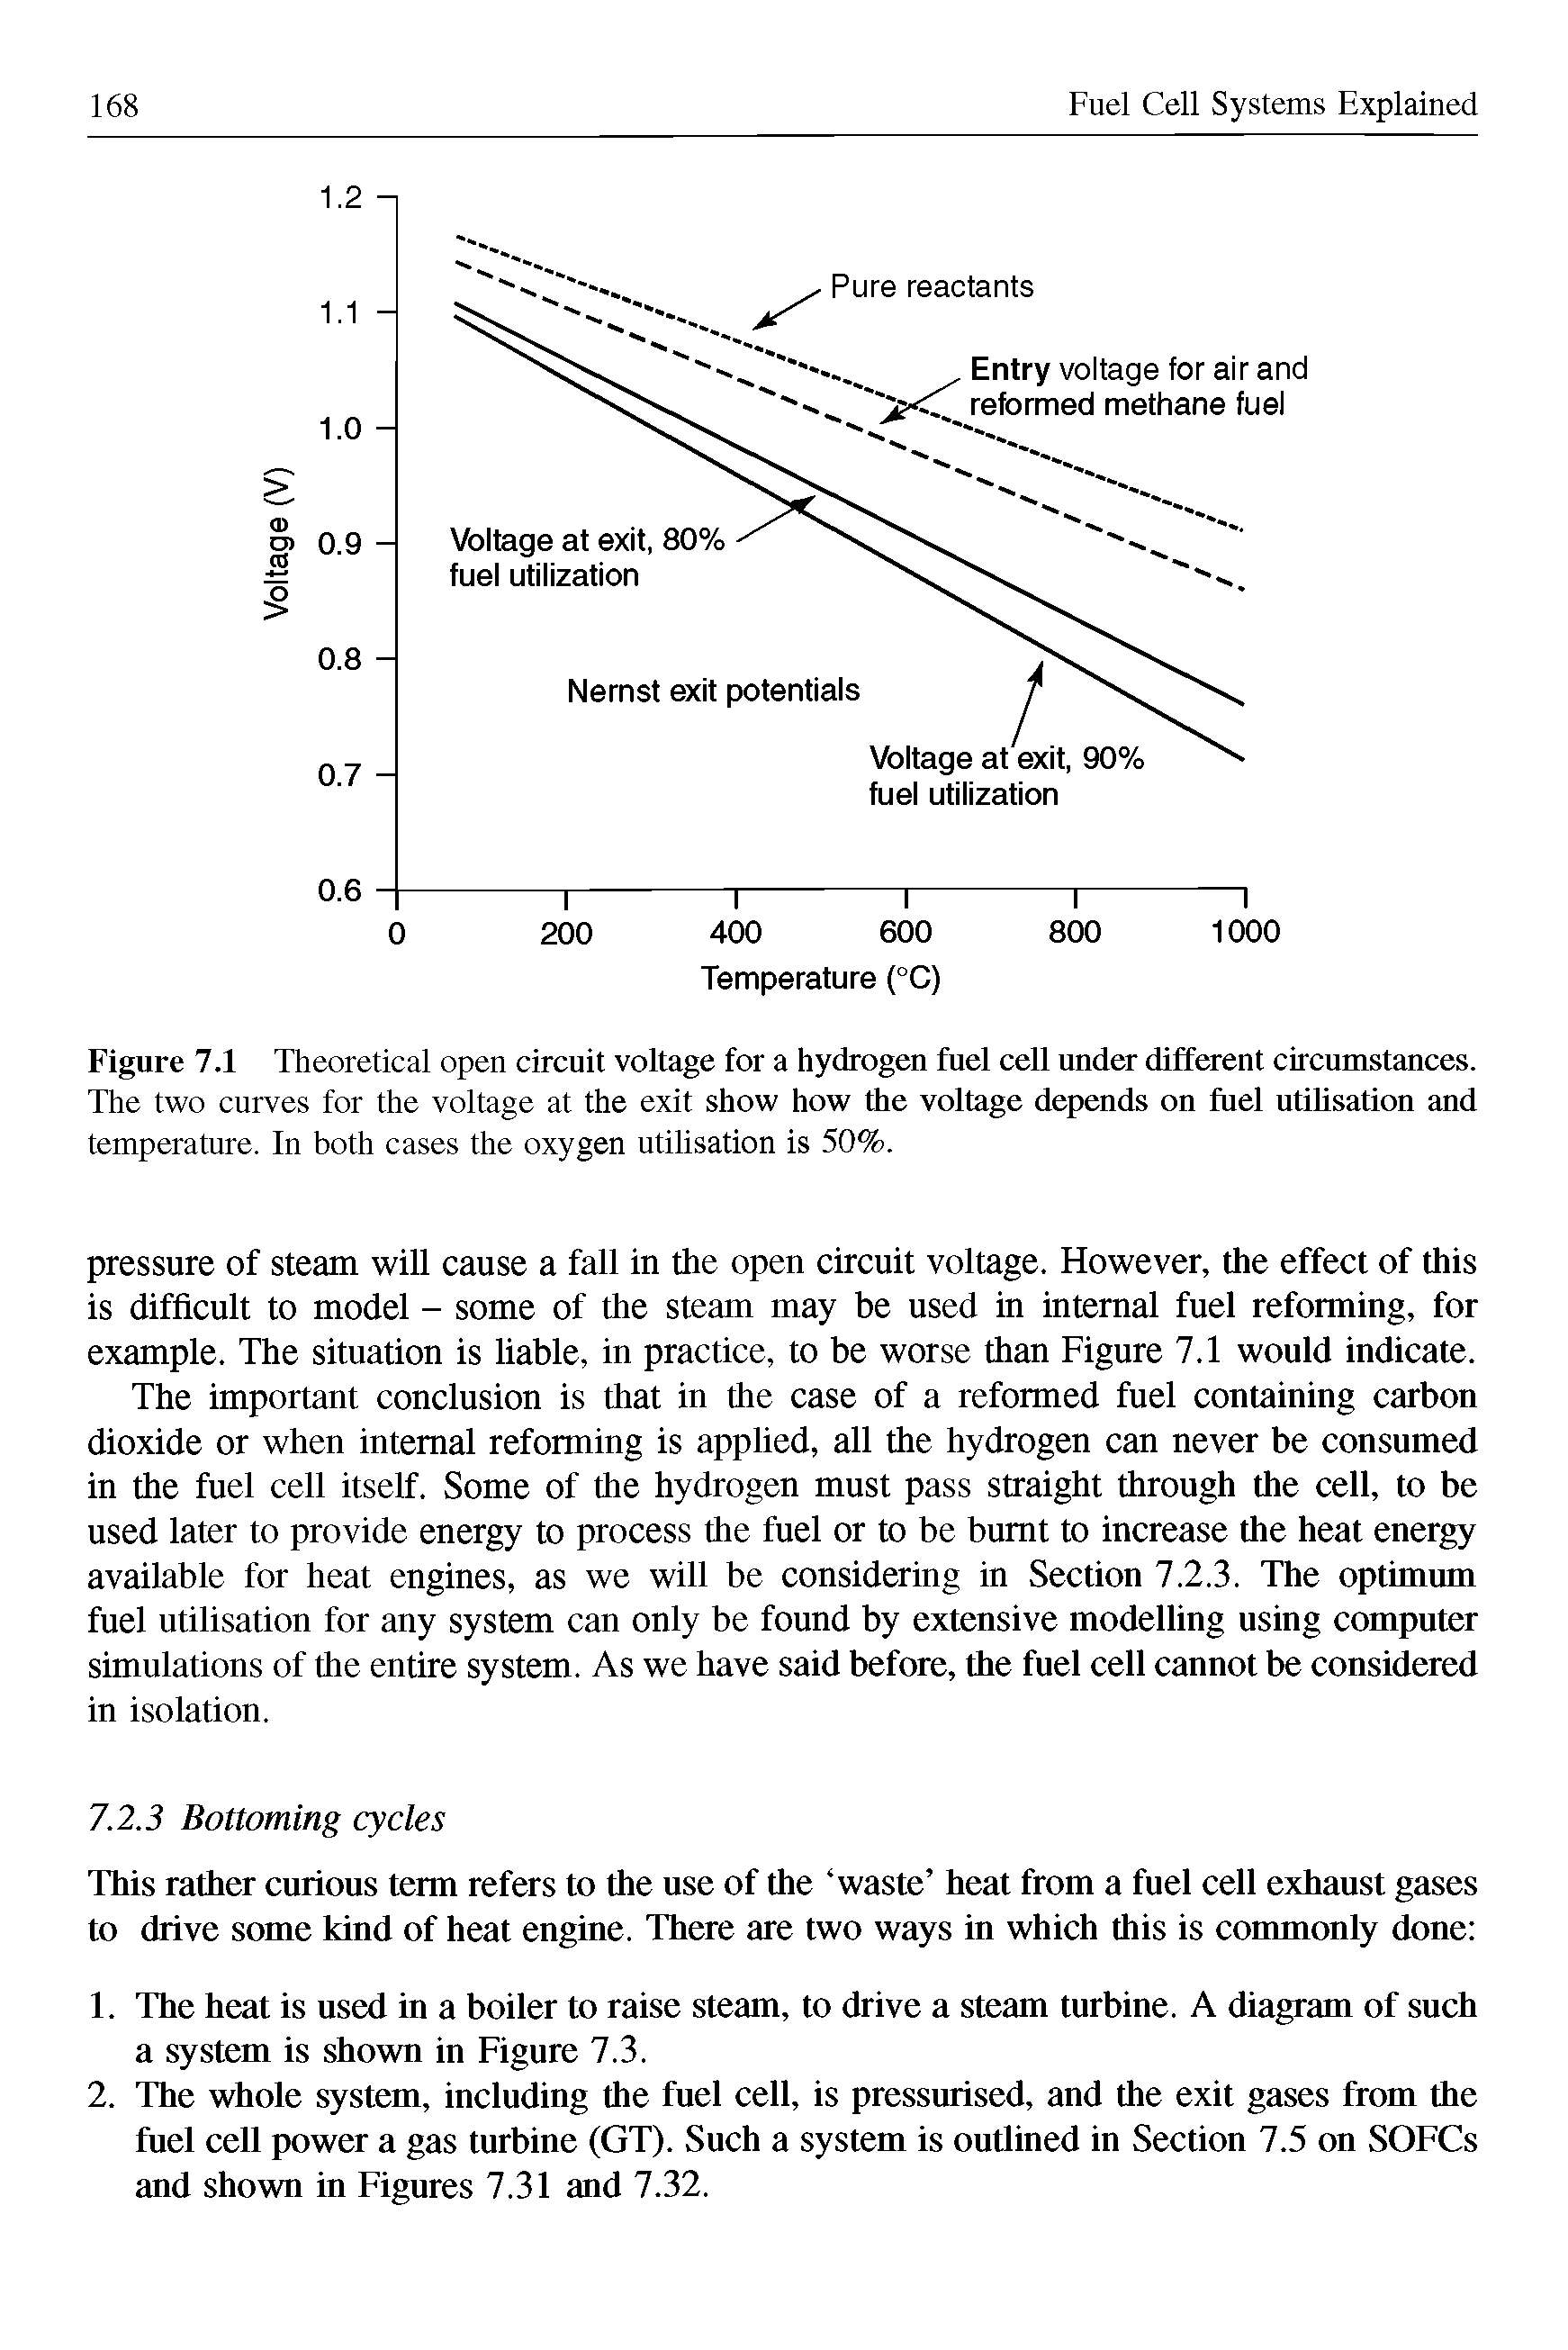 Figure 7.1 Theoretical open circuit voltage for a hydrogen fuel cell under diffeent circumstances. The two curves for the voltage at the exit show how the voltage depends on fuel utilisation and temperature. In both cases the oxygen utilisation is 50%.